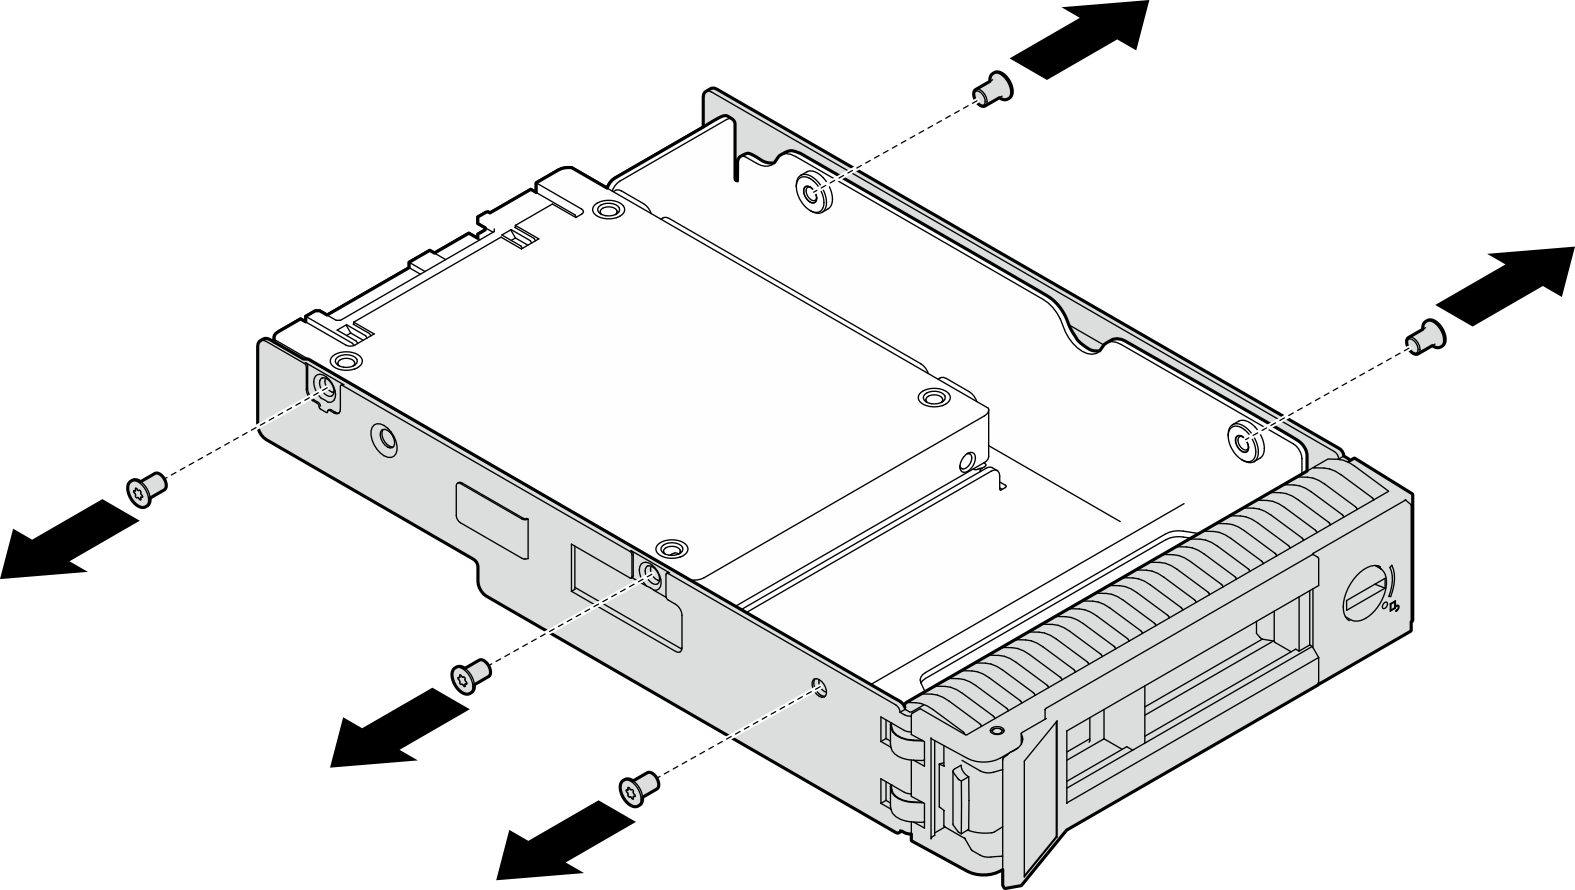 Removing the screws that secure the 2.5-inch drive and the drive adapter